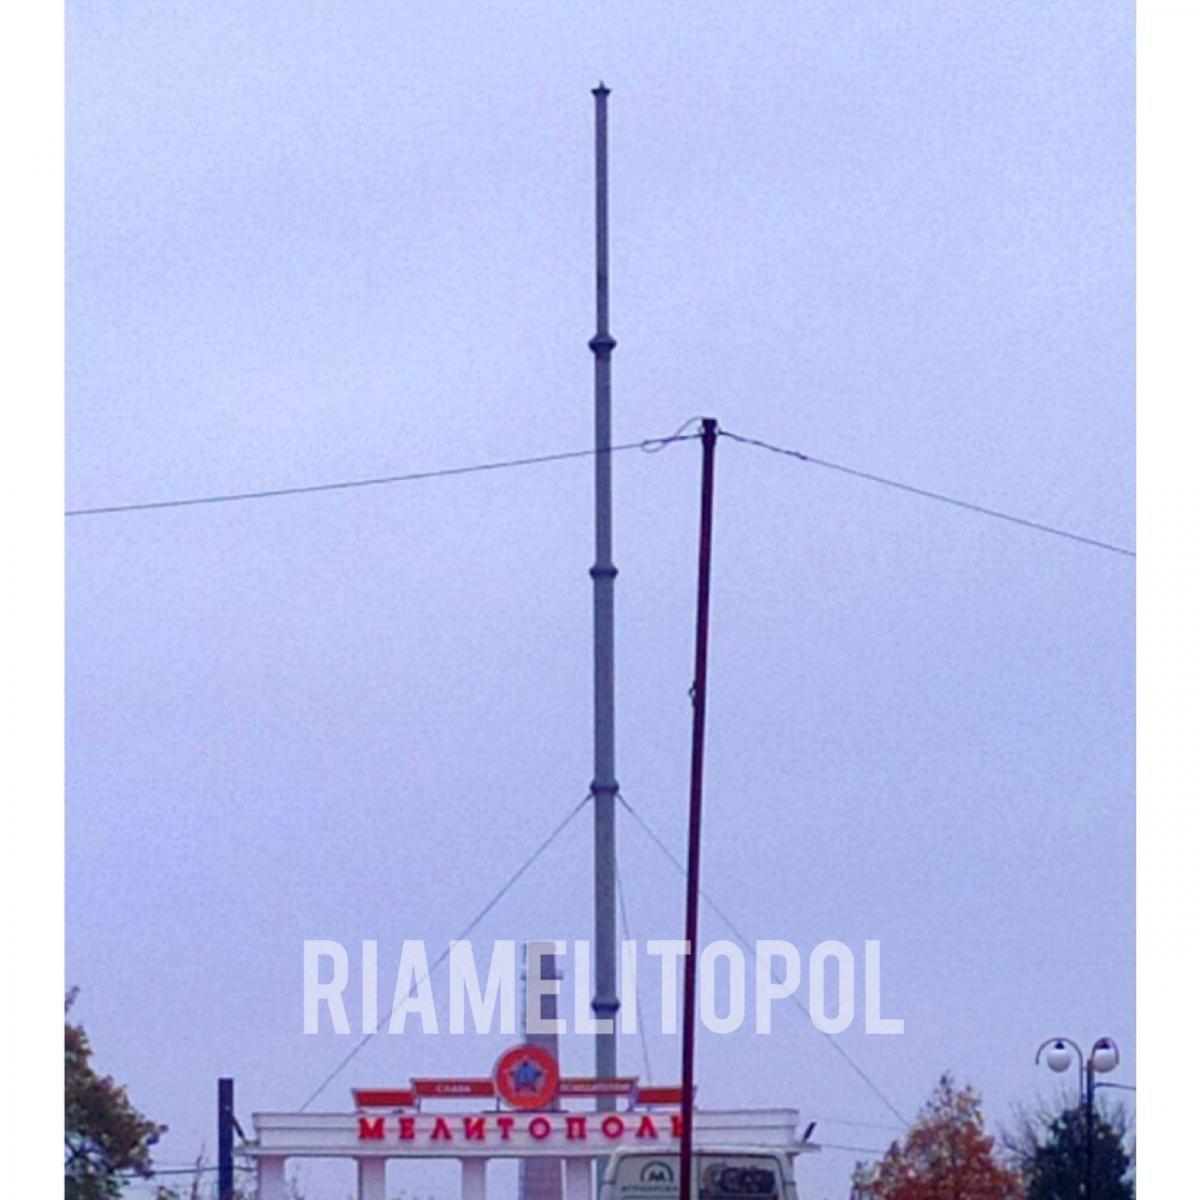 The Russians removed the flag from the main square of Melitopol /t.me/riamelitopol